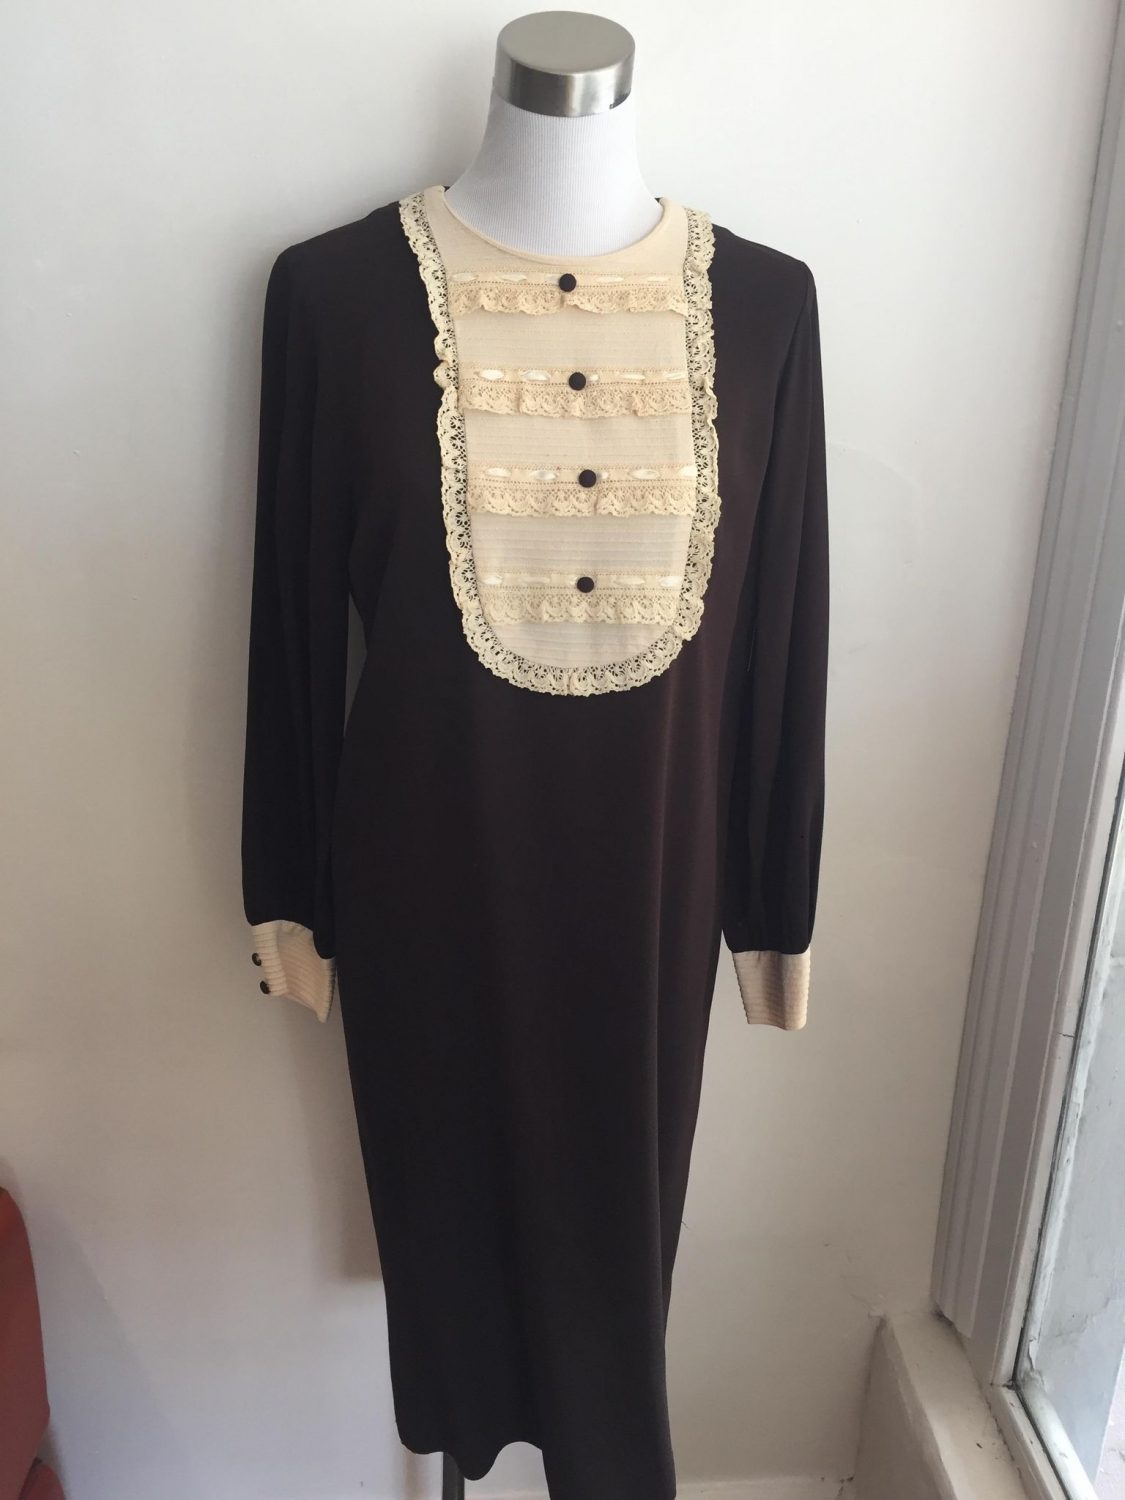 Prue Acton 1970s Brown and Cream Lace Front Dress | Chaos Bazaar Vintage